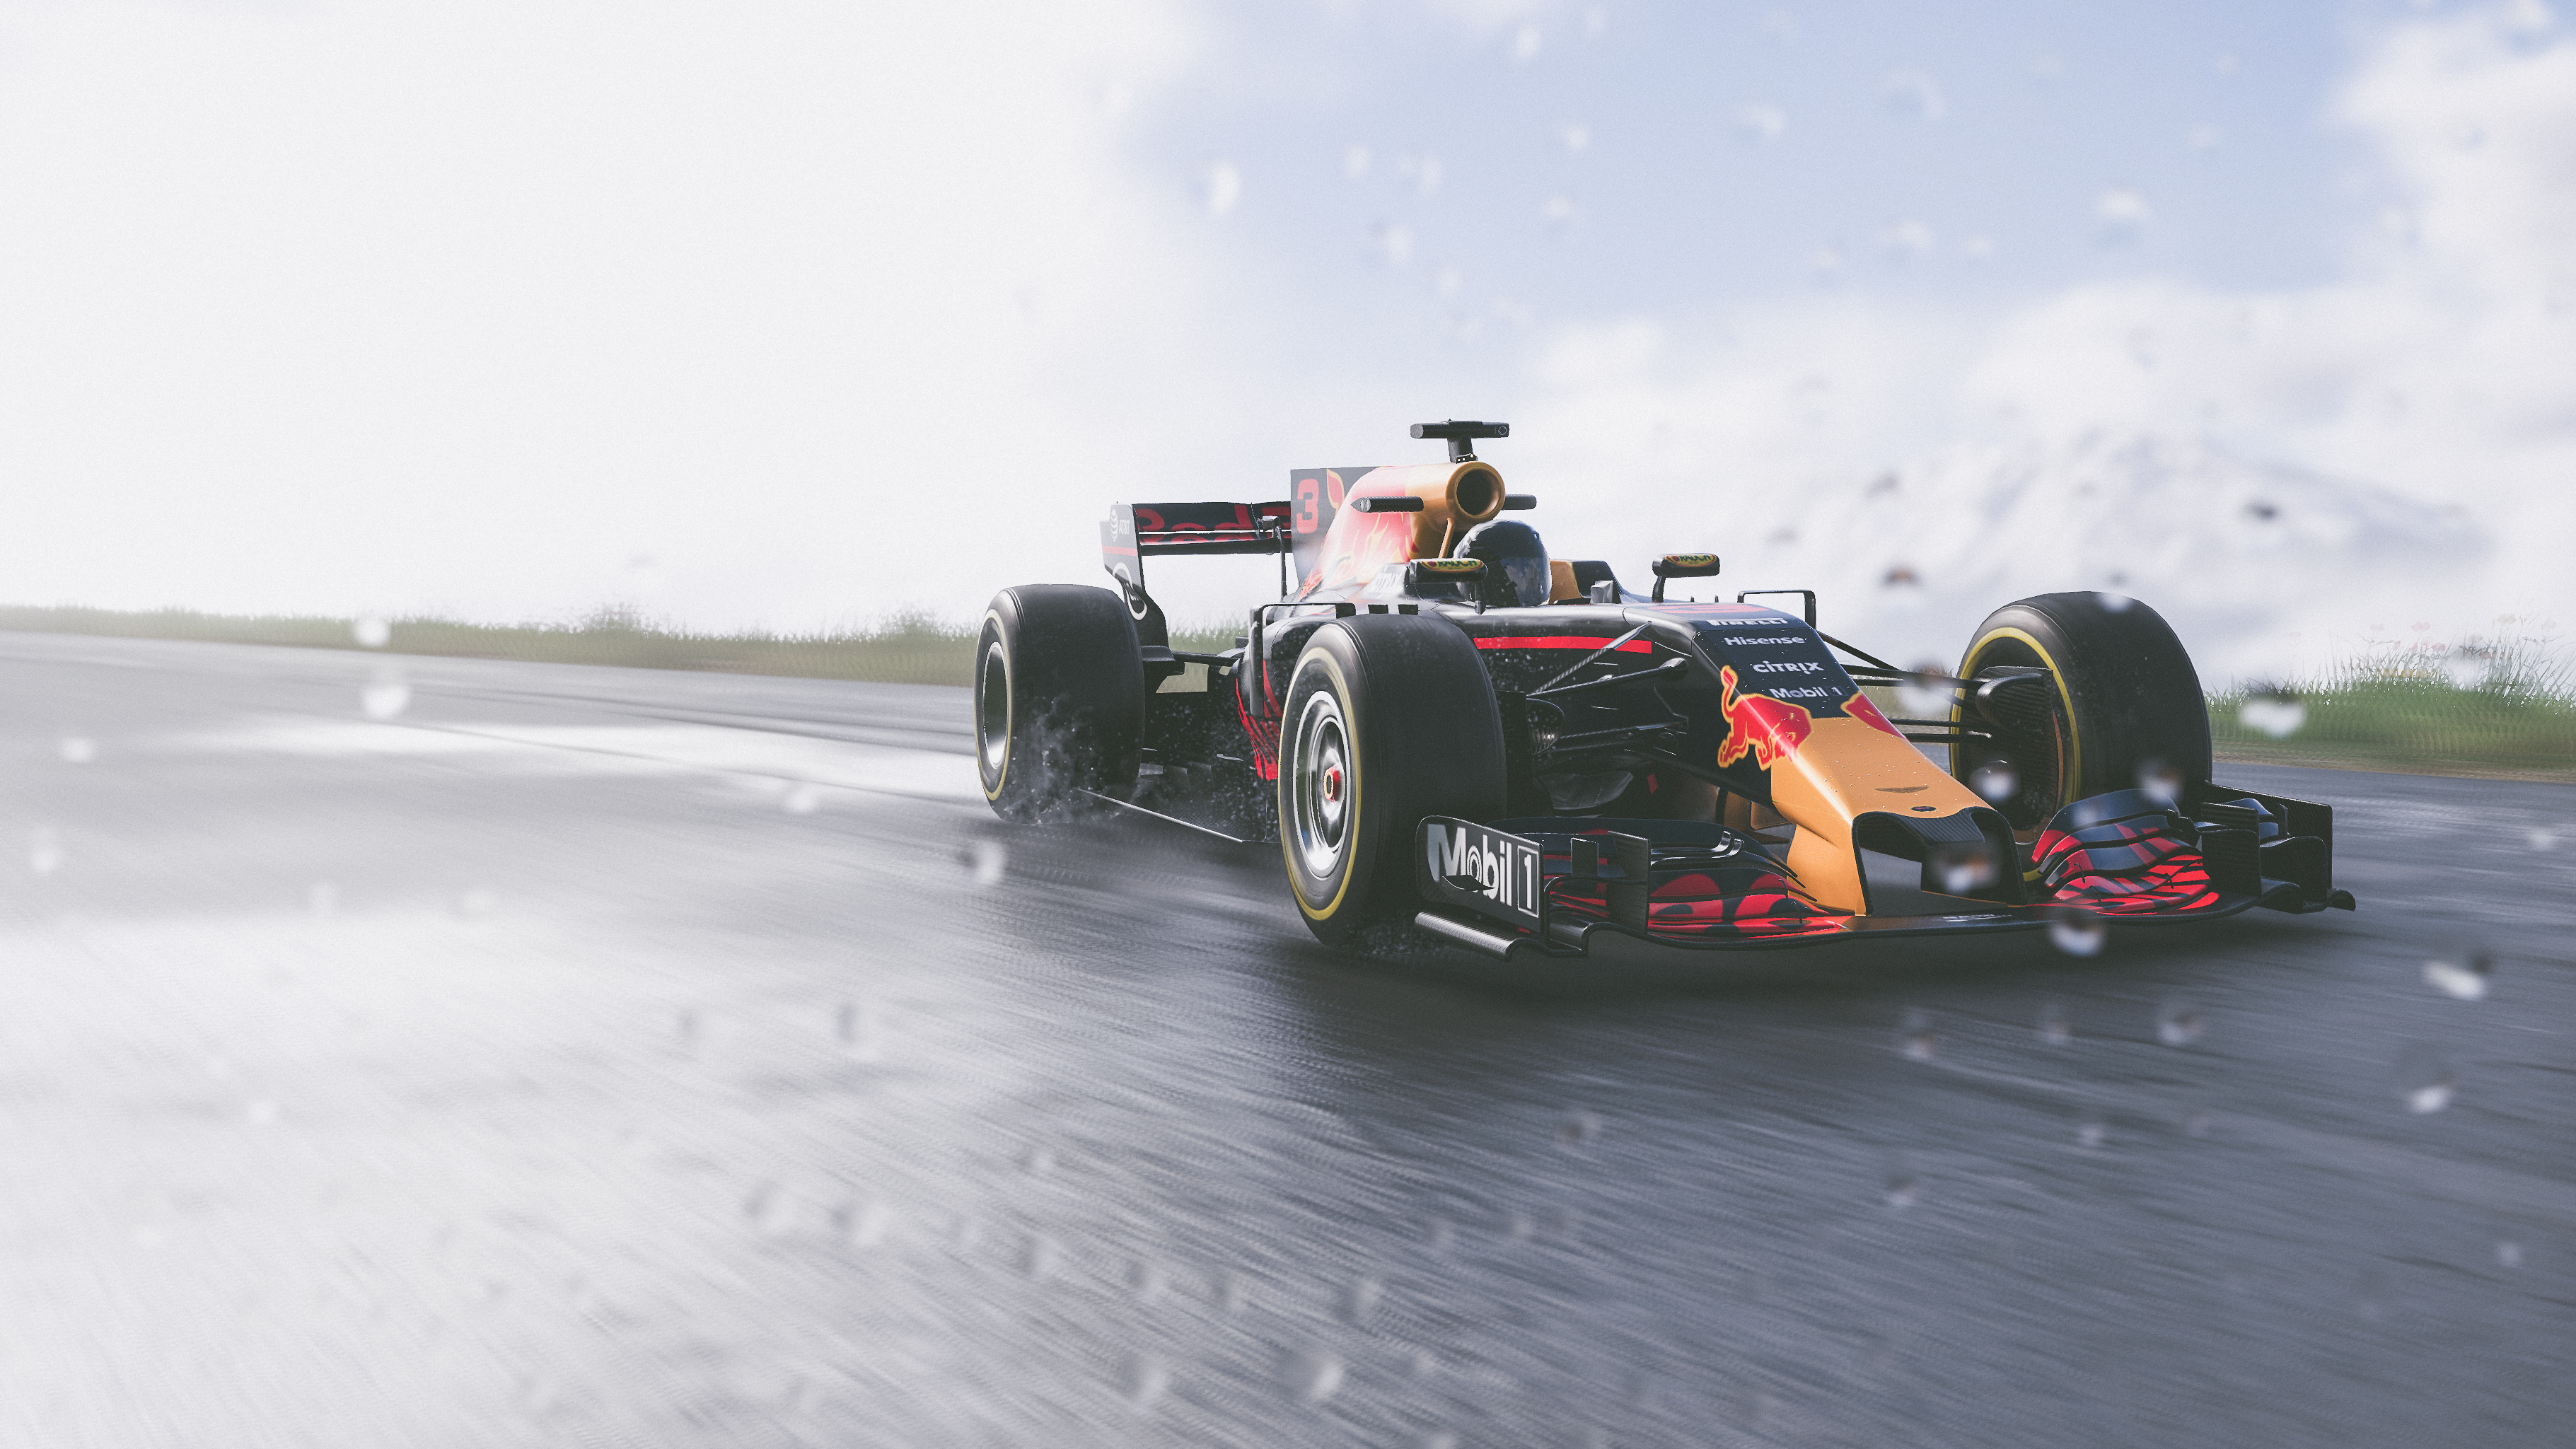 3642x2049 1680x1050 The Crew 2 Red Bull F1 Car 4k 1680x1050 Resolution HD 4k Wallpapers, Images, Backgrounds, Photos and Pictures